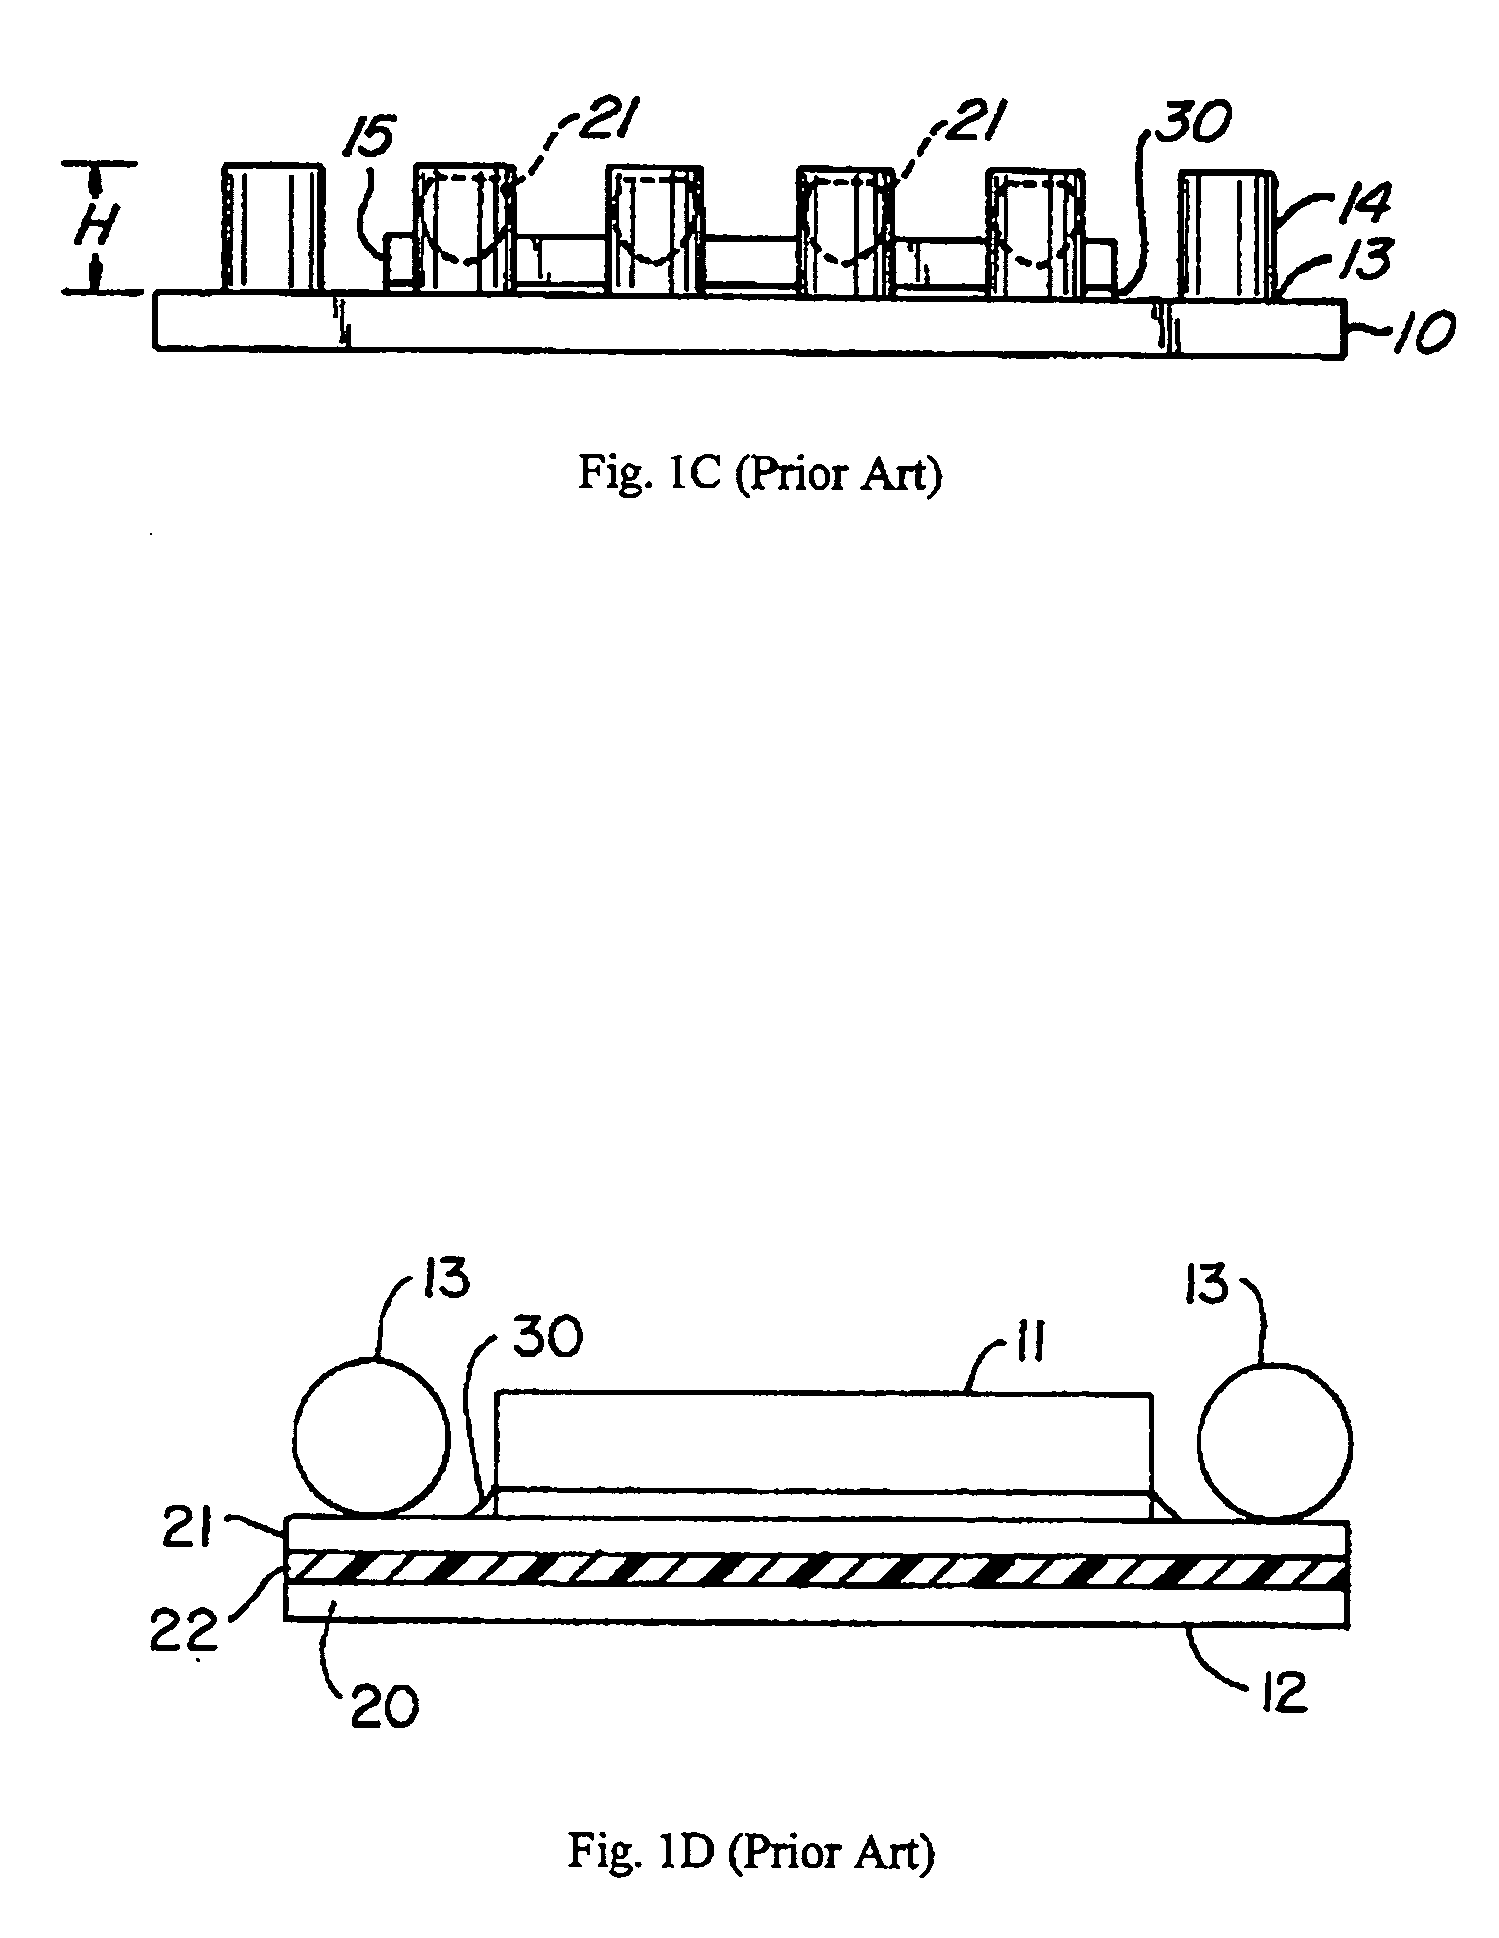 Vertically packaged MOSFET and IC power devices as integrated module using 3D interconnected laminates